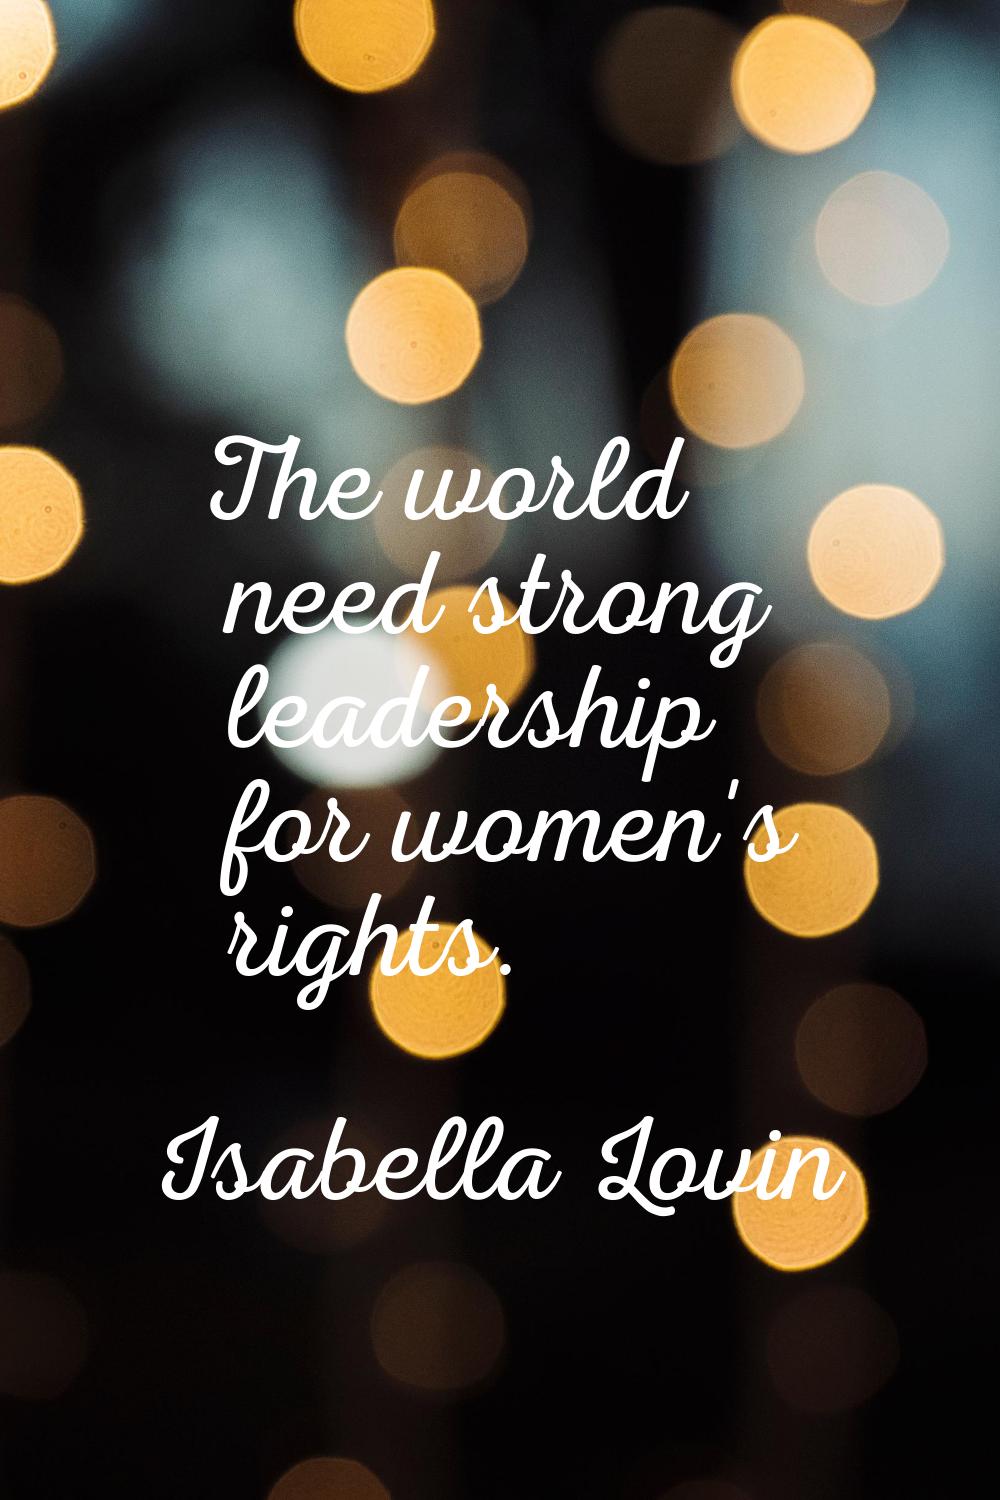 The world need strong leadership for women's rights.